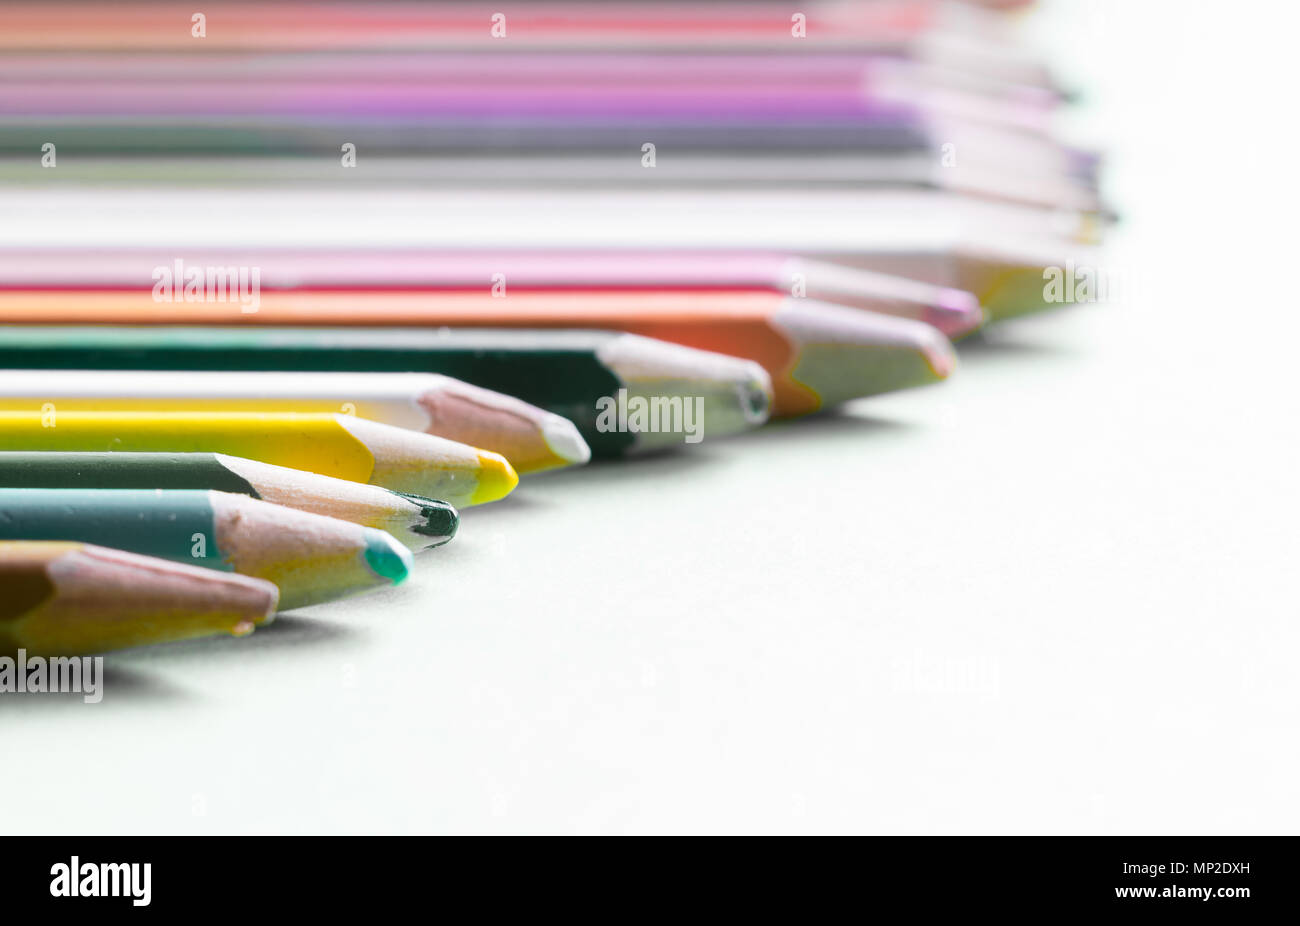 Very used pencils of different colors isolated on a green background. Concept of spare to buy new ones Stock Photo